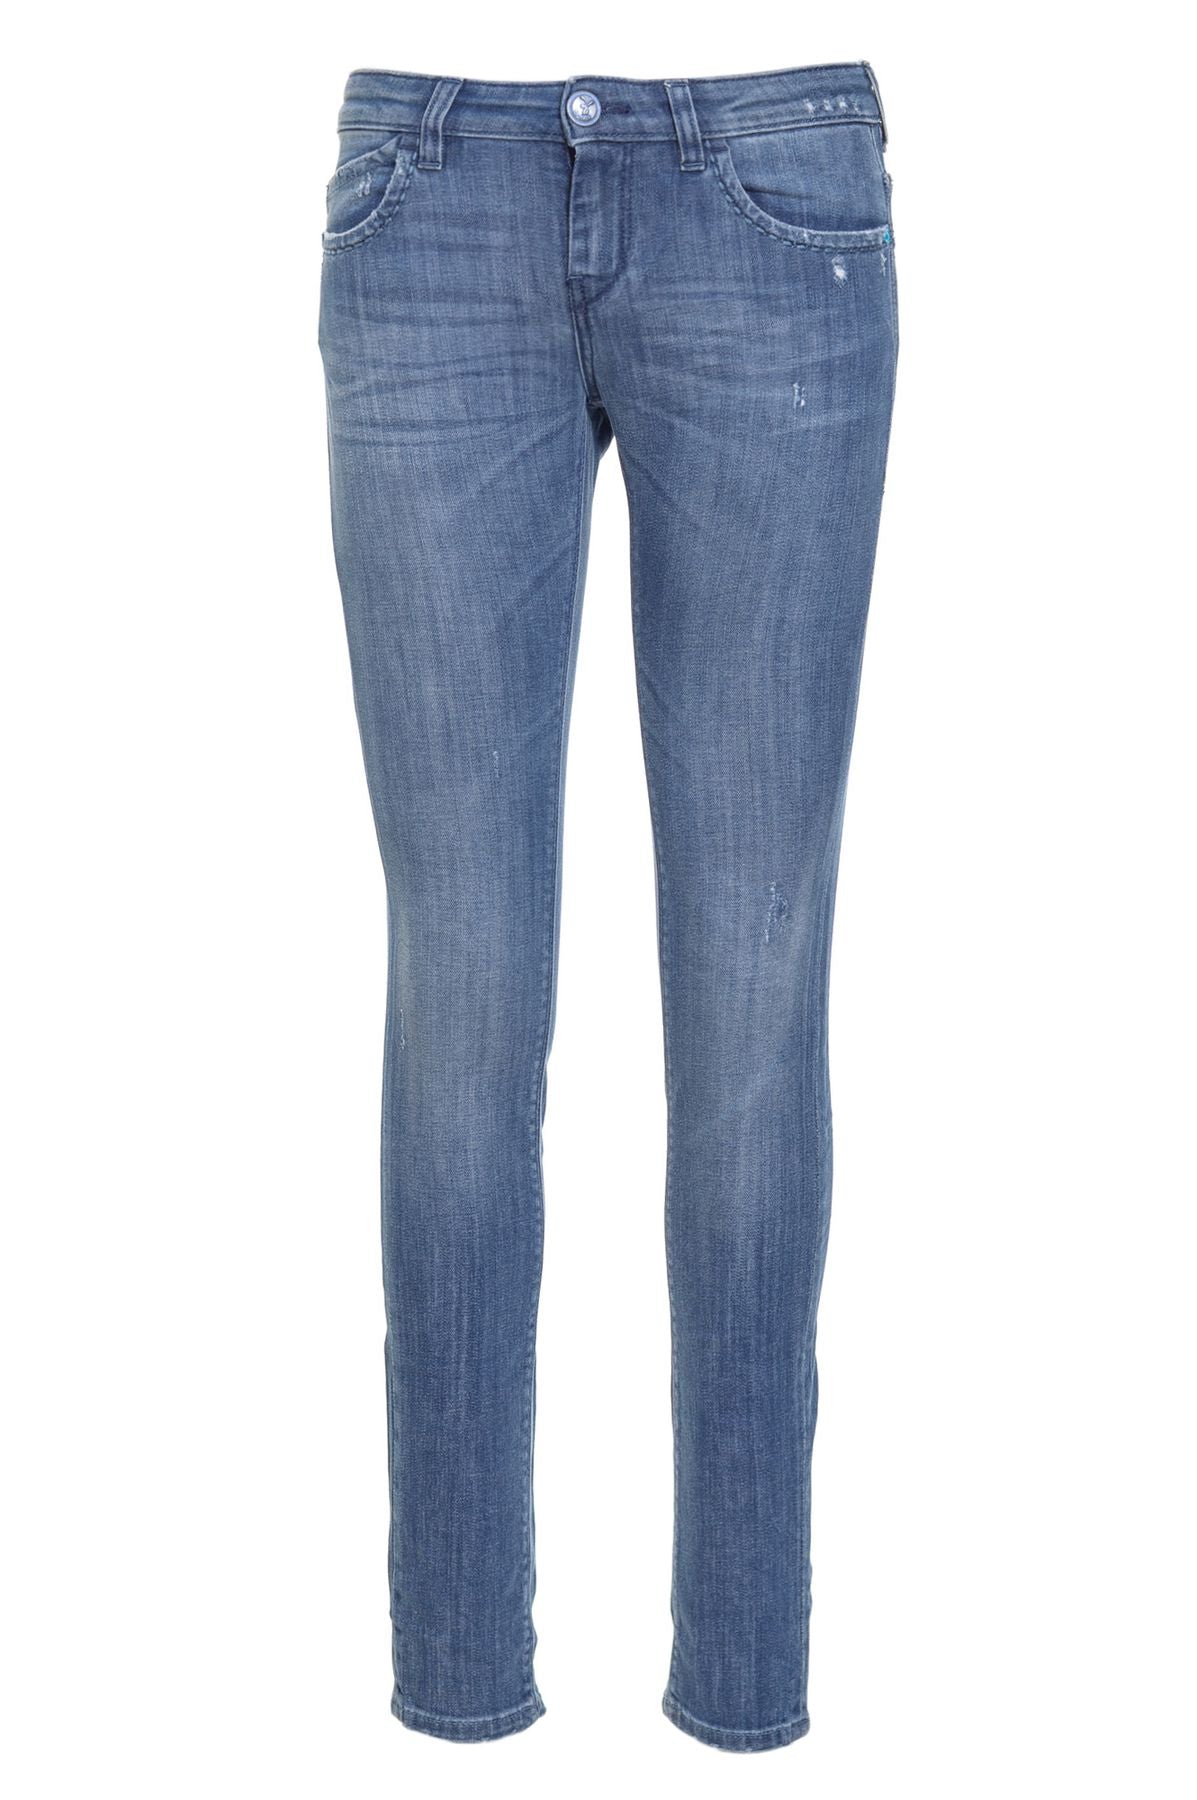 Re-HasH Jeans Autunno/Inverno p265holly25308587